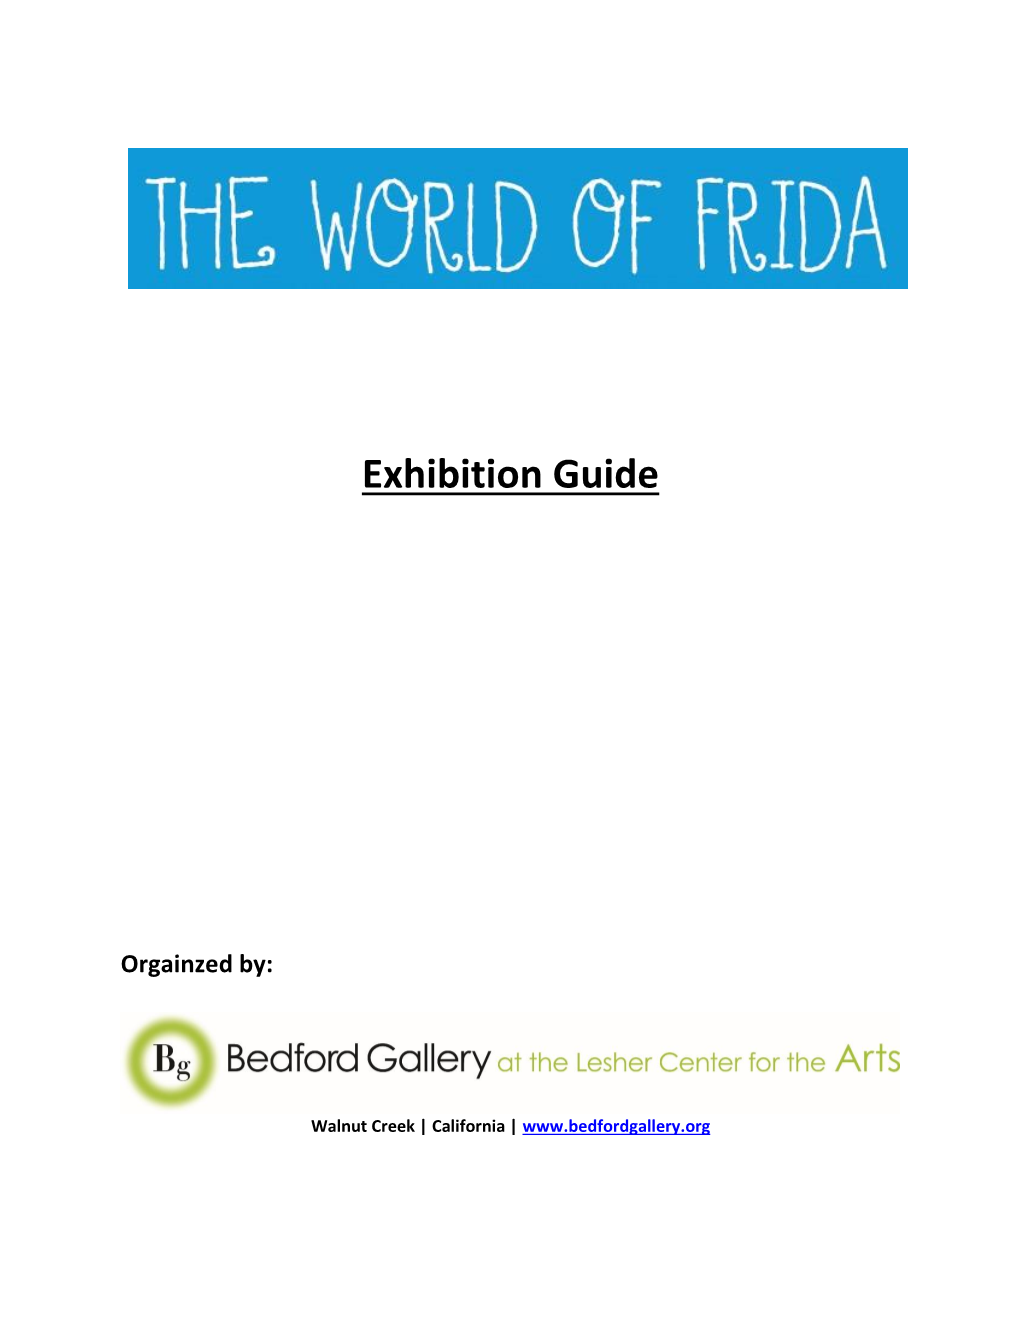 The World of Frida Exhibition Guide the World of Frida Reflects Frida Kahlo’S Passion and Pluck, and Demonstrates the Power, Scope and Weight of Her Work